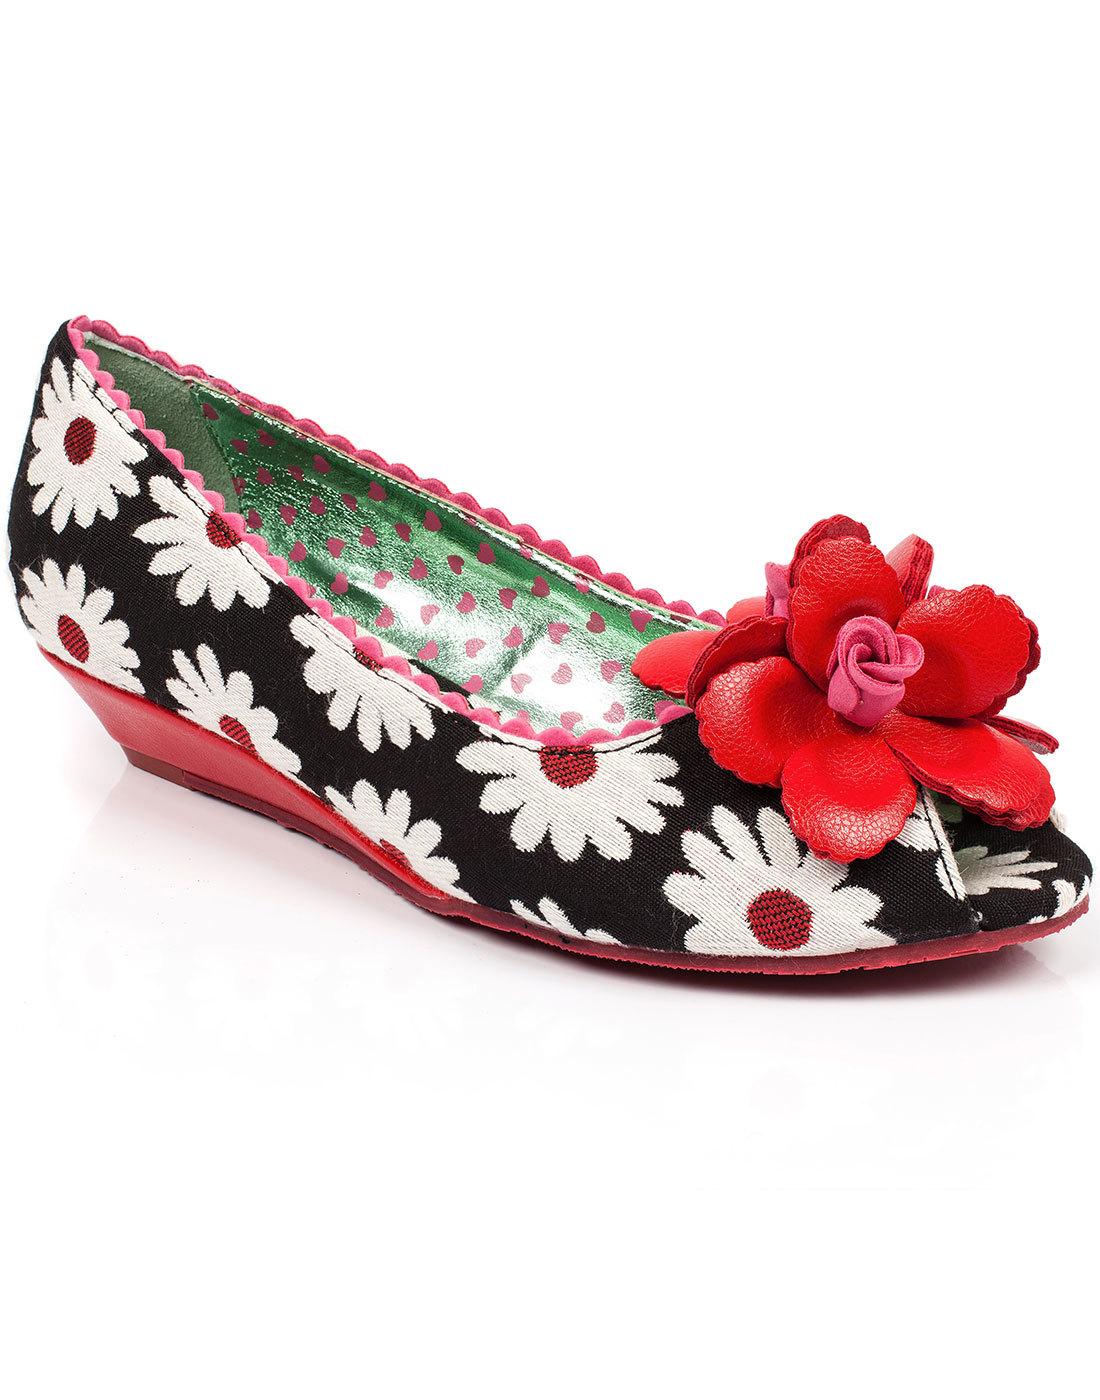 Daisy Delight POETIC LICENCE 60s Mod Floral Wedges